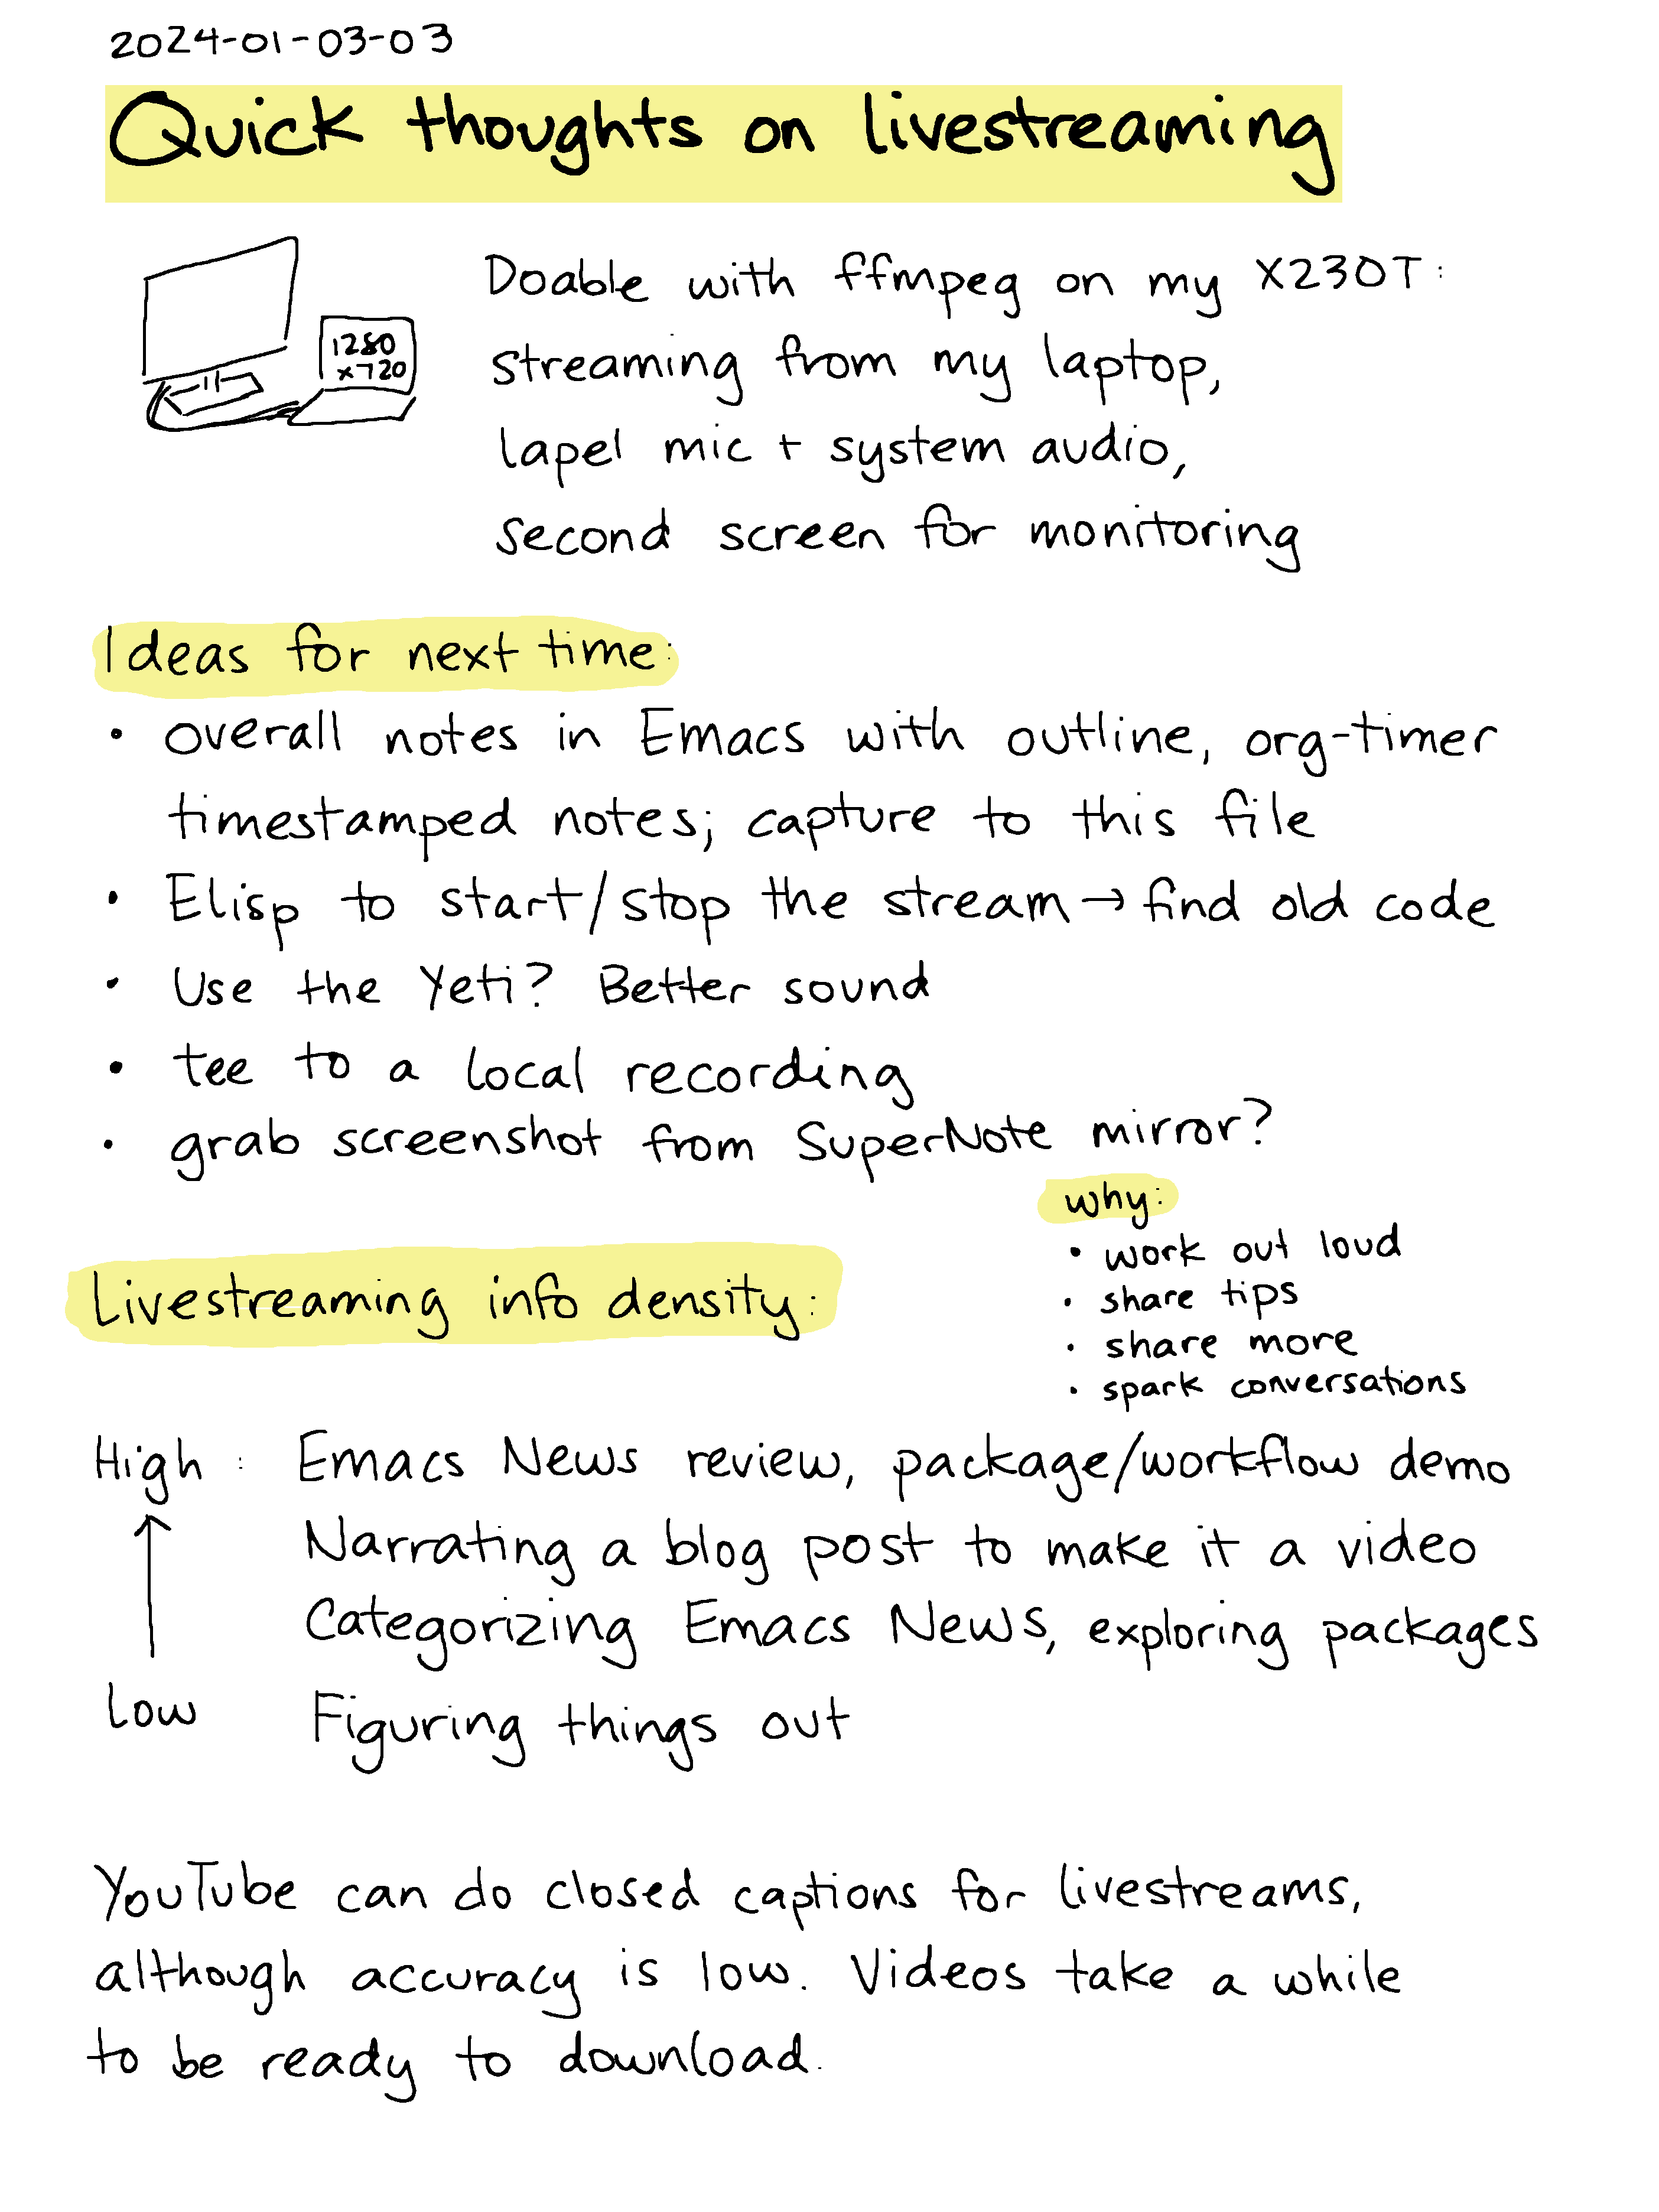 2024-01-03-03 Quick thoughts on livestreaming #sharing #video #streaming #community.png